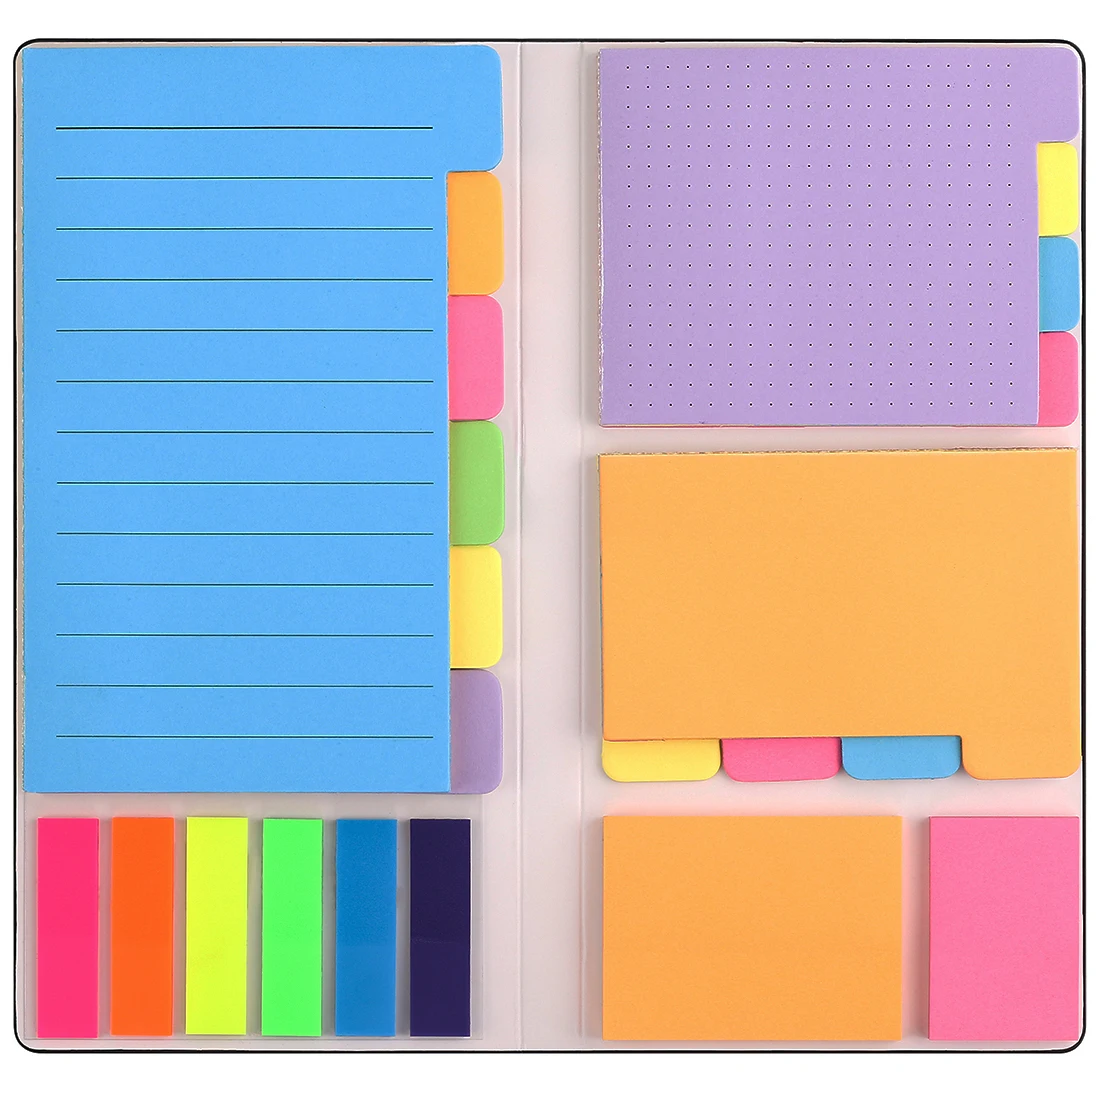 Sticky Notes Set, Sticky Notes Tabs, 410 Pack, Divider Sticky Notes,, Planner Sticky for Kitchen, Home, School, Office Supplies weekly planner notebook agenda kawaii budget binder office student school stationery supplies teacher gift notes blocks binder